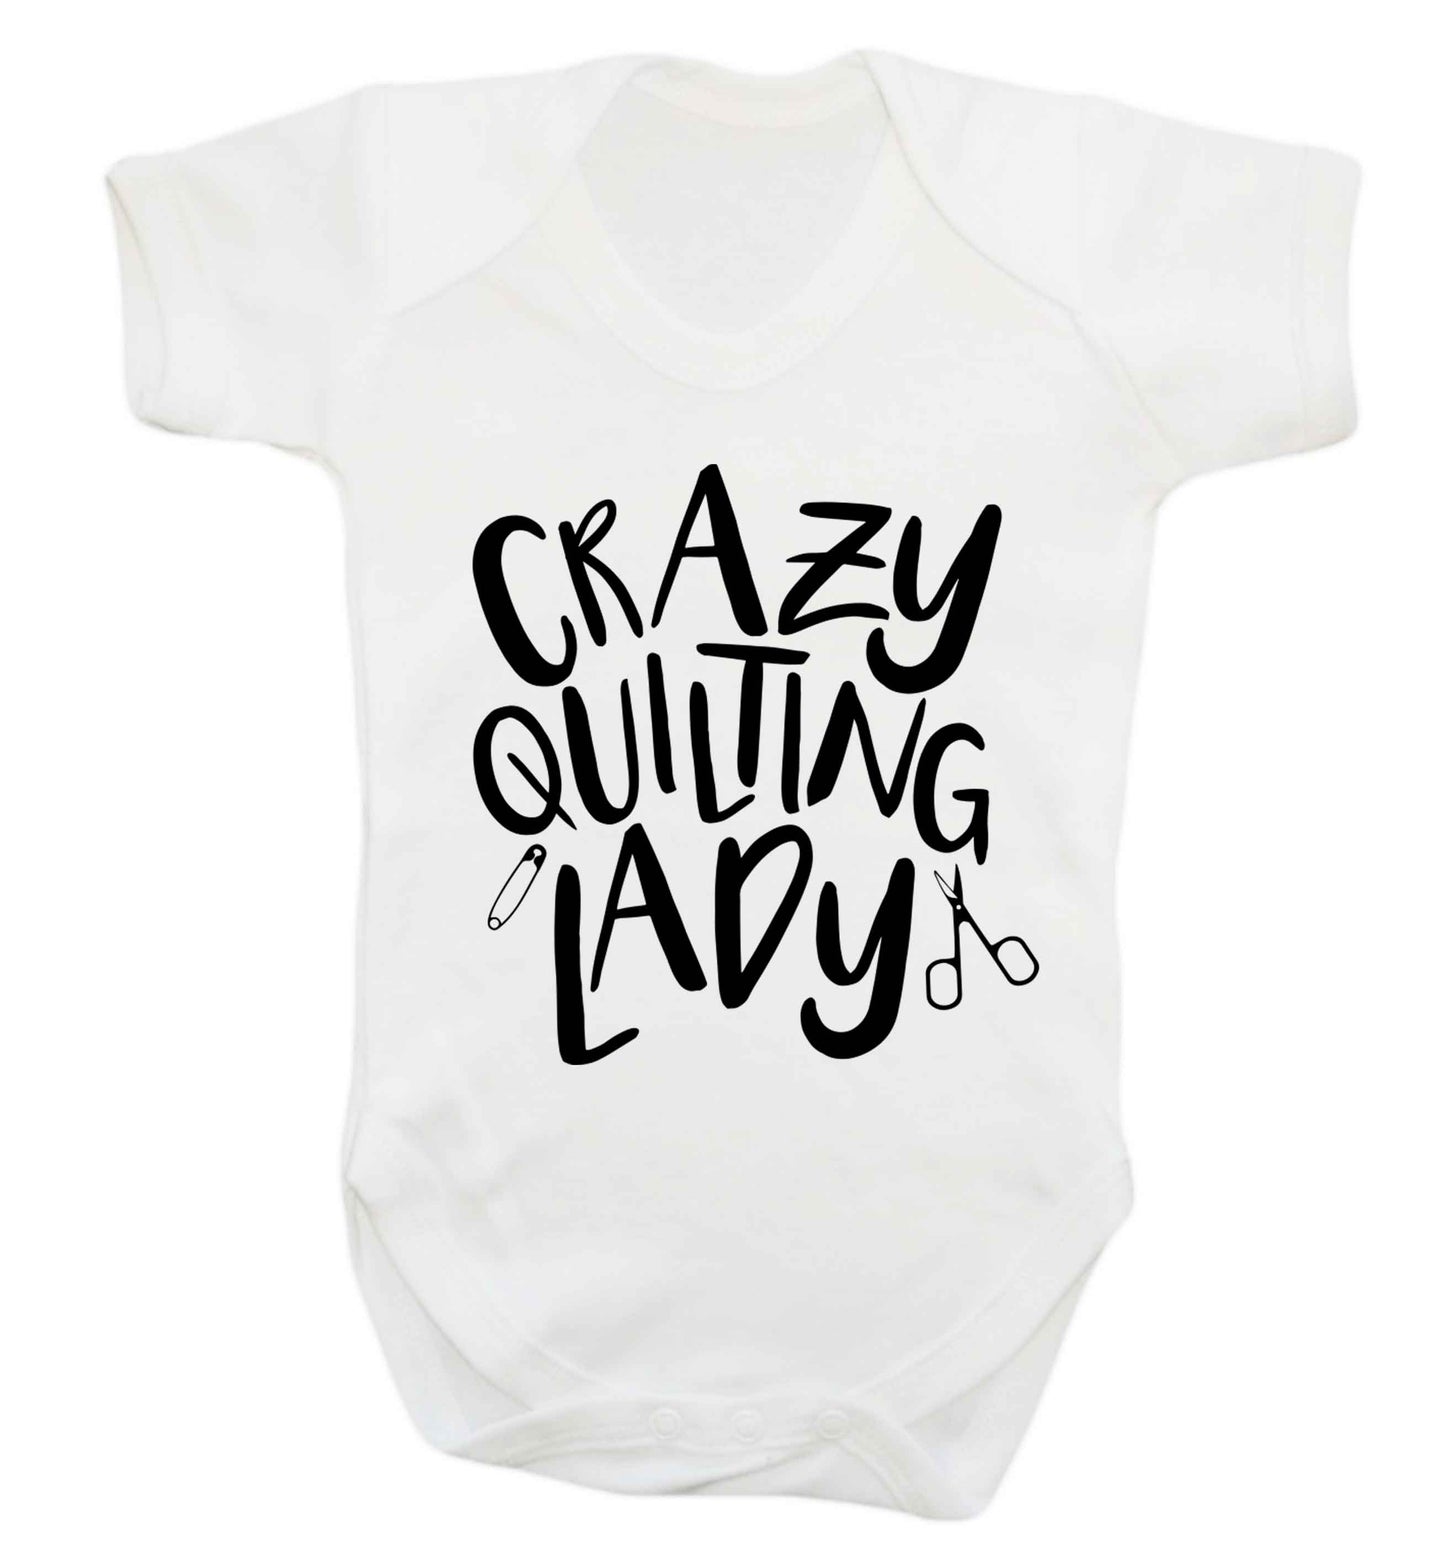 Crazy quilting lady Baby Vest white 18-24 months